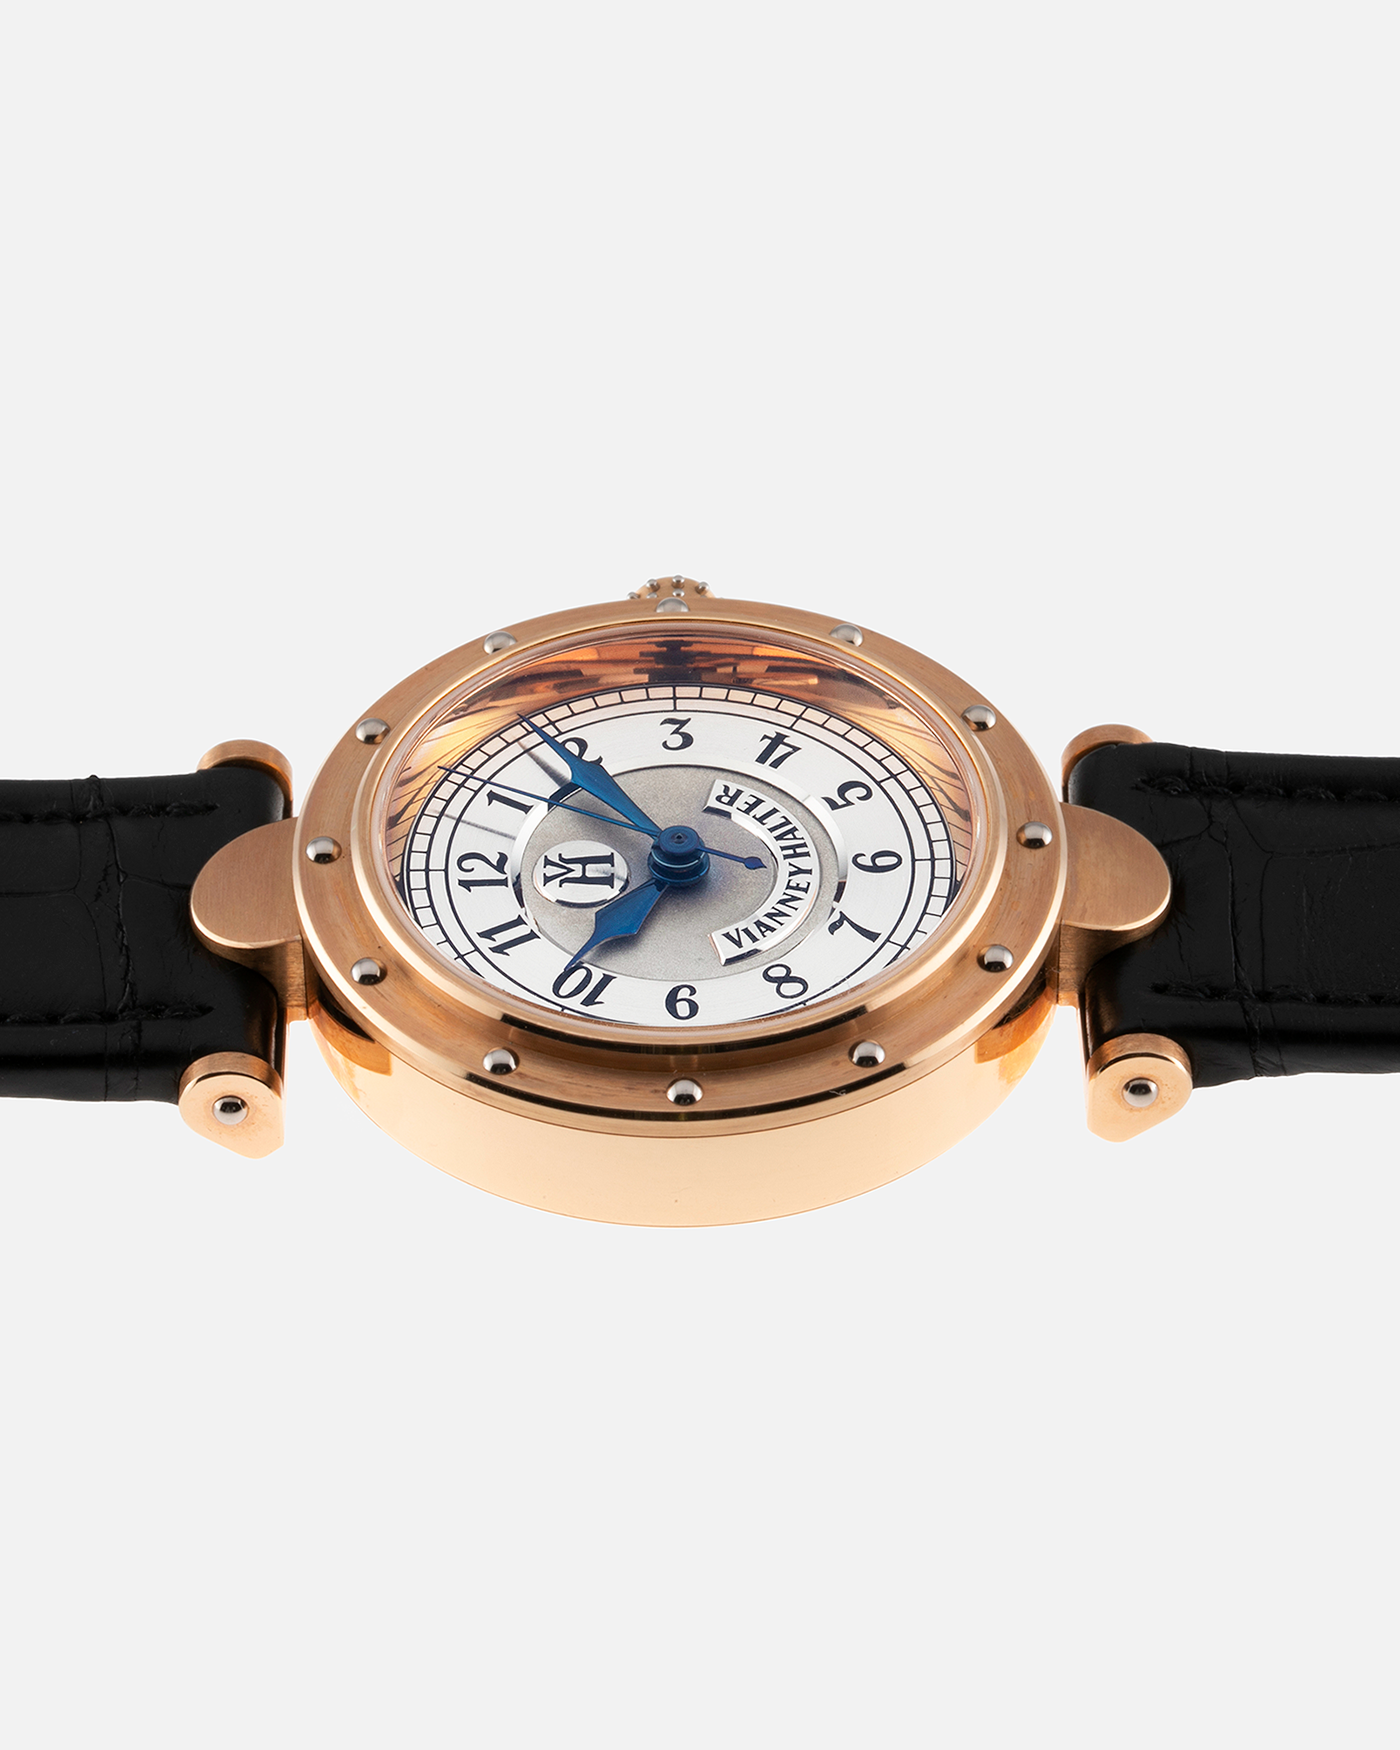 Brand: Vianney Halter Year: 2000’s Model: Classic Material: 18k Rose Gold Movement: Modified Lemania 8810 with mystery motor Case Diameter: 36mm Bracelet/Strap: Vianney Halter Black Alligator with matching Rose Gold Buckle